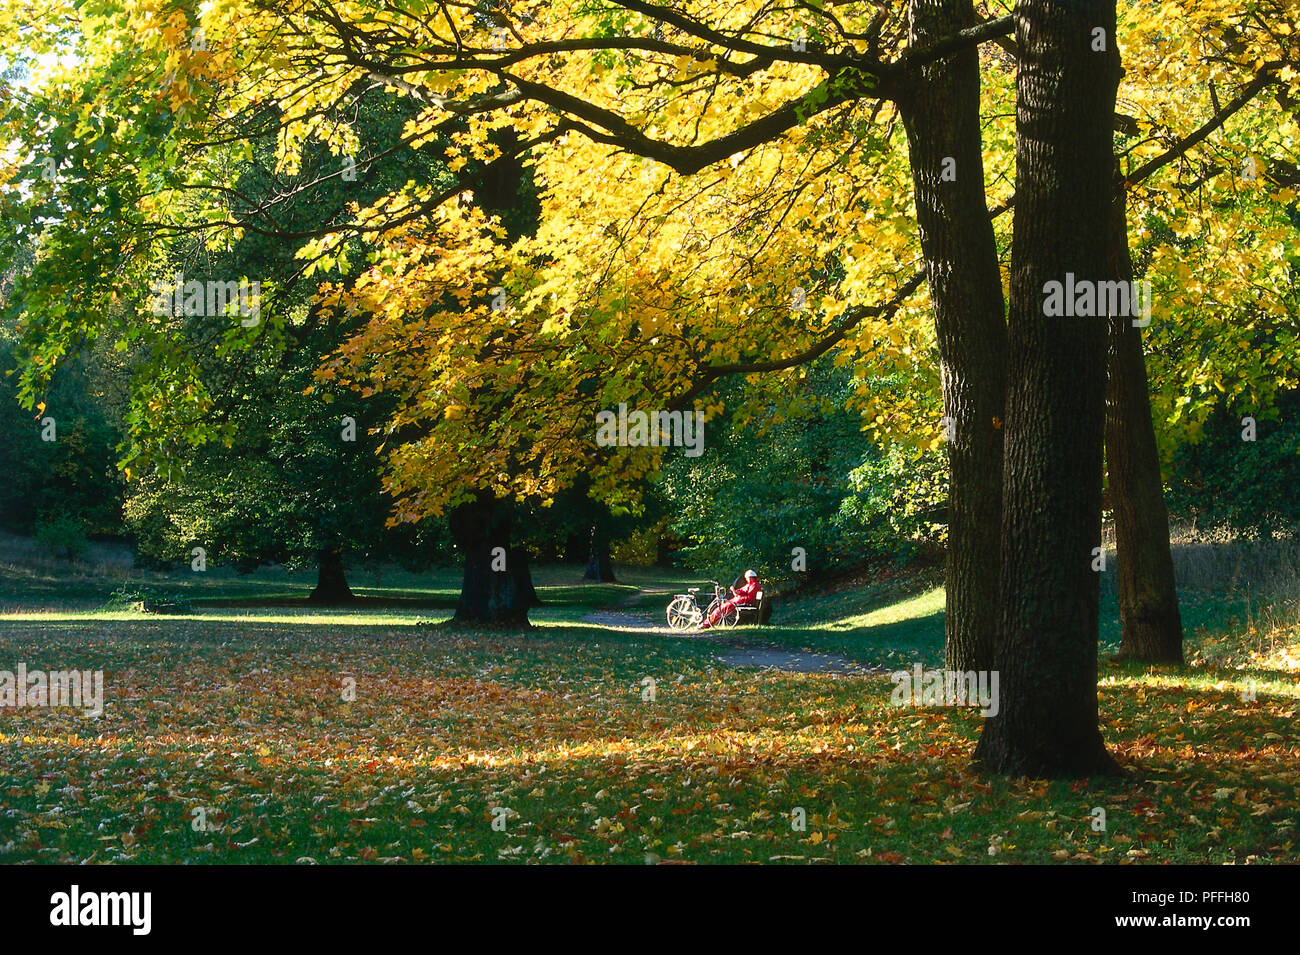 Sweden, Stockholm, profusion of autumn colours and fallen leaves in Hagaparken. In the distance people are seated underneath a shaft of light on a park bench. Stock Photo